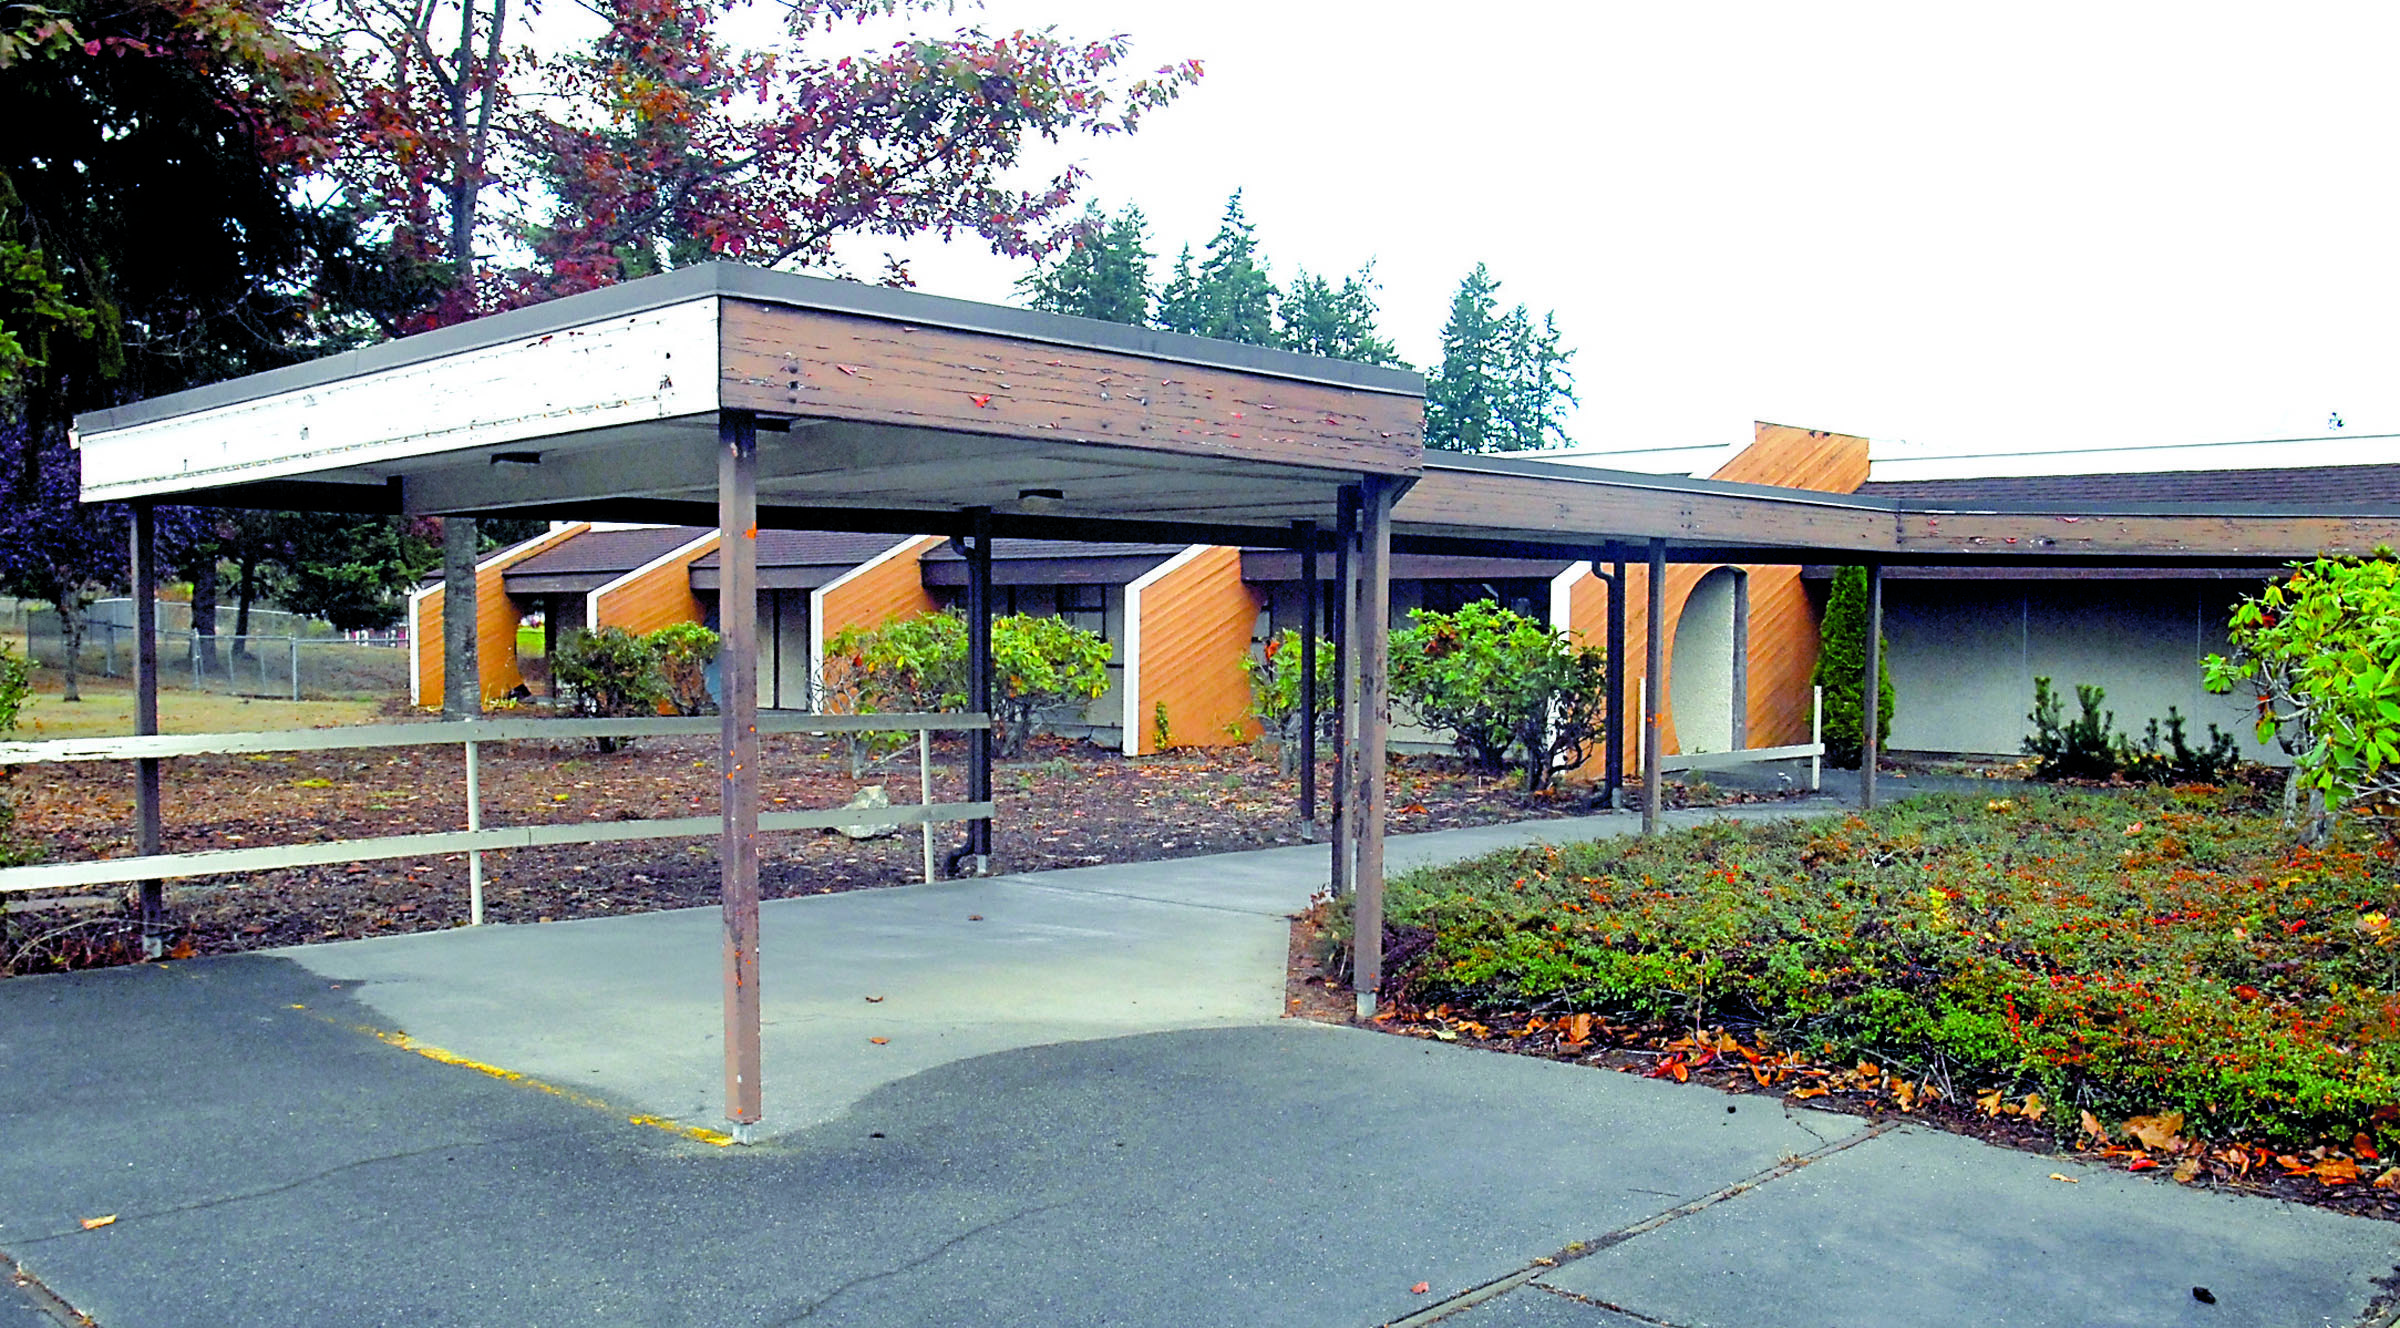 The shuttered Fairview Elementary School in Port Angeles. (Peninsula Daily News)